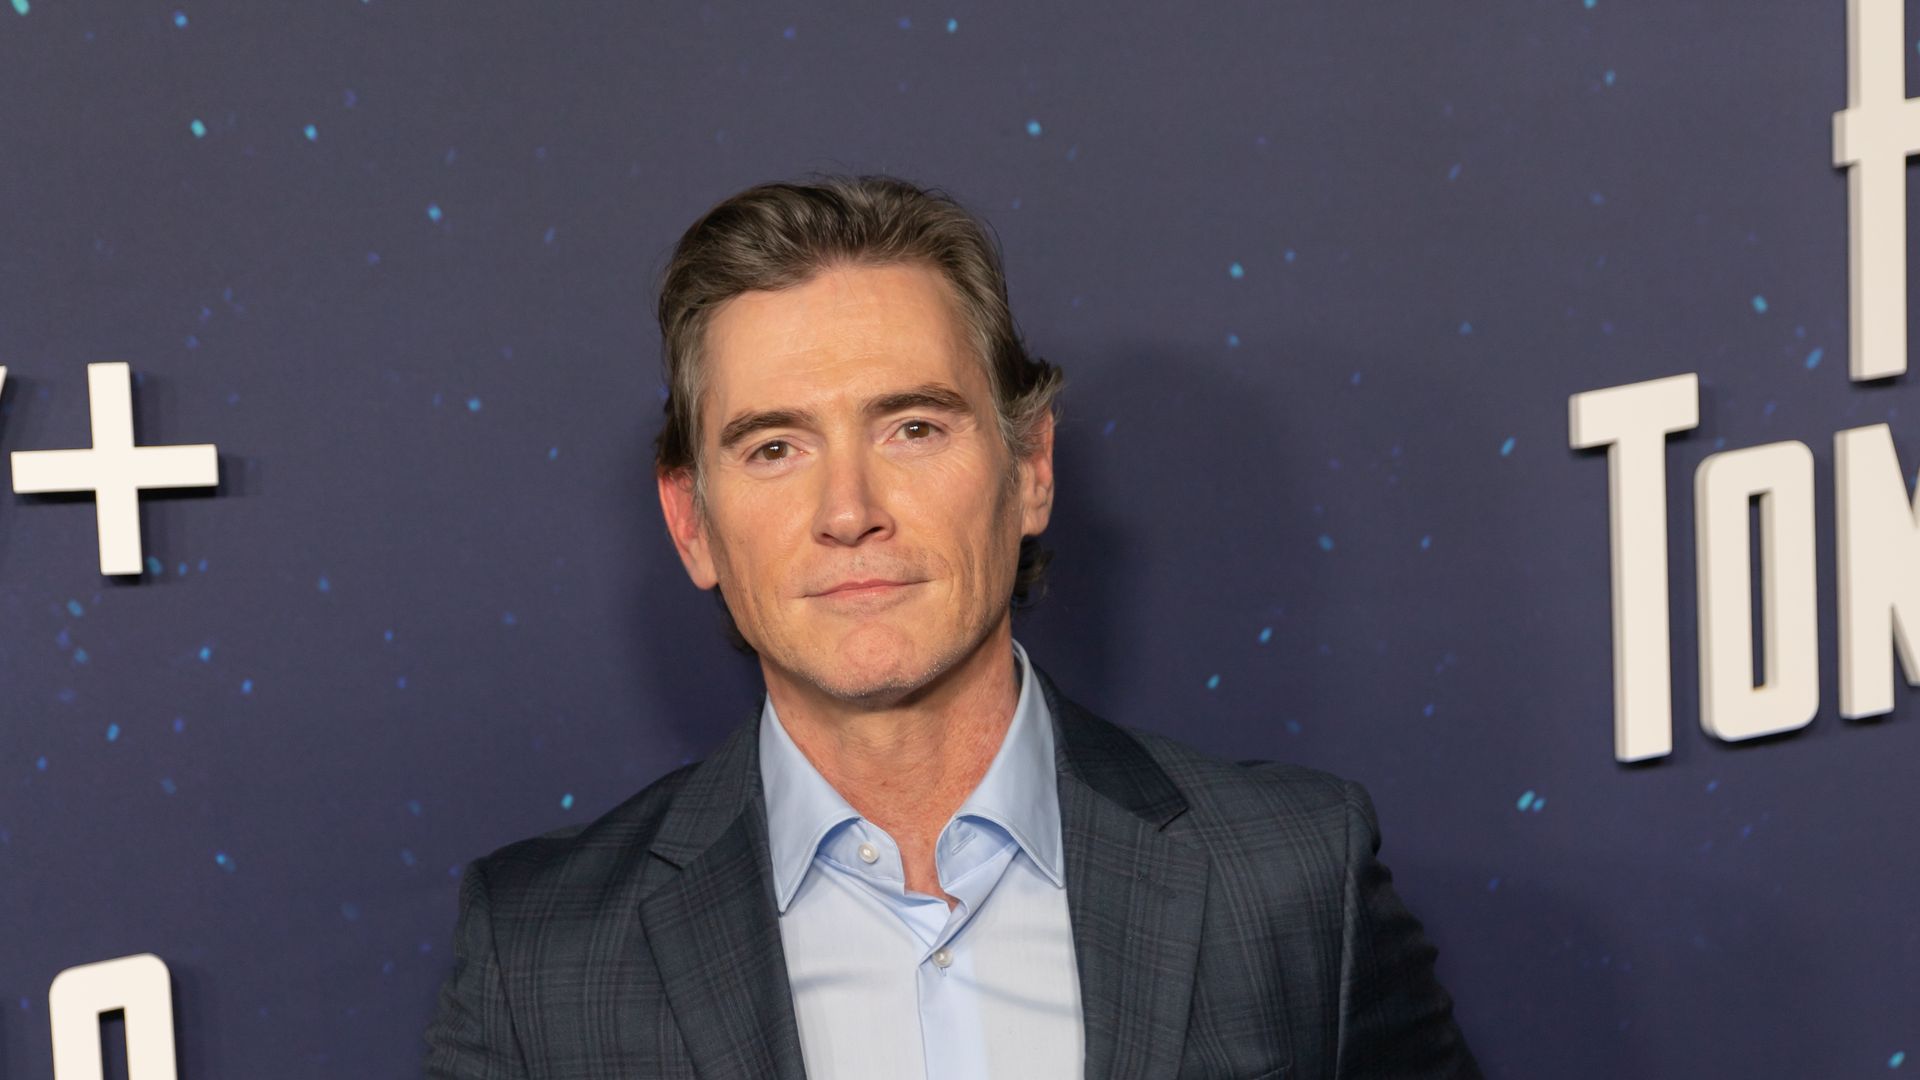 Billy Crudup attends Apple TV+'s "Hello Tomorrow" New York premiere at the Whitby Hotel on February 15, 2023 in New York City